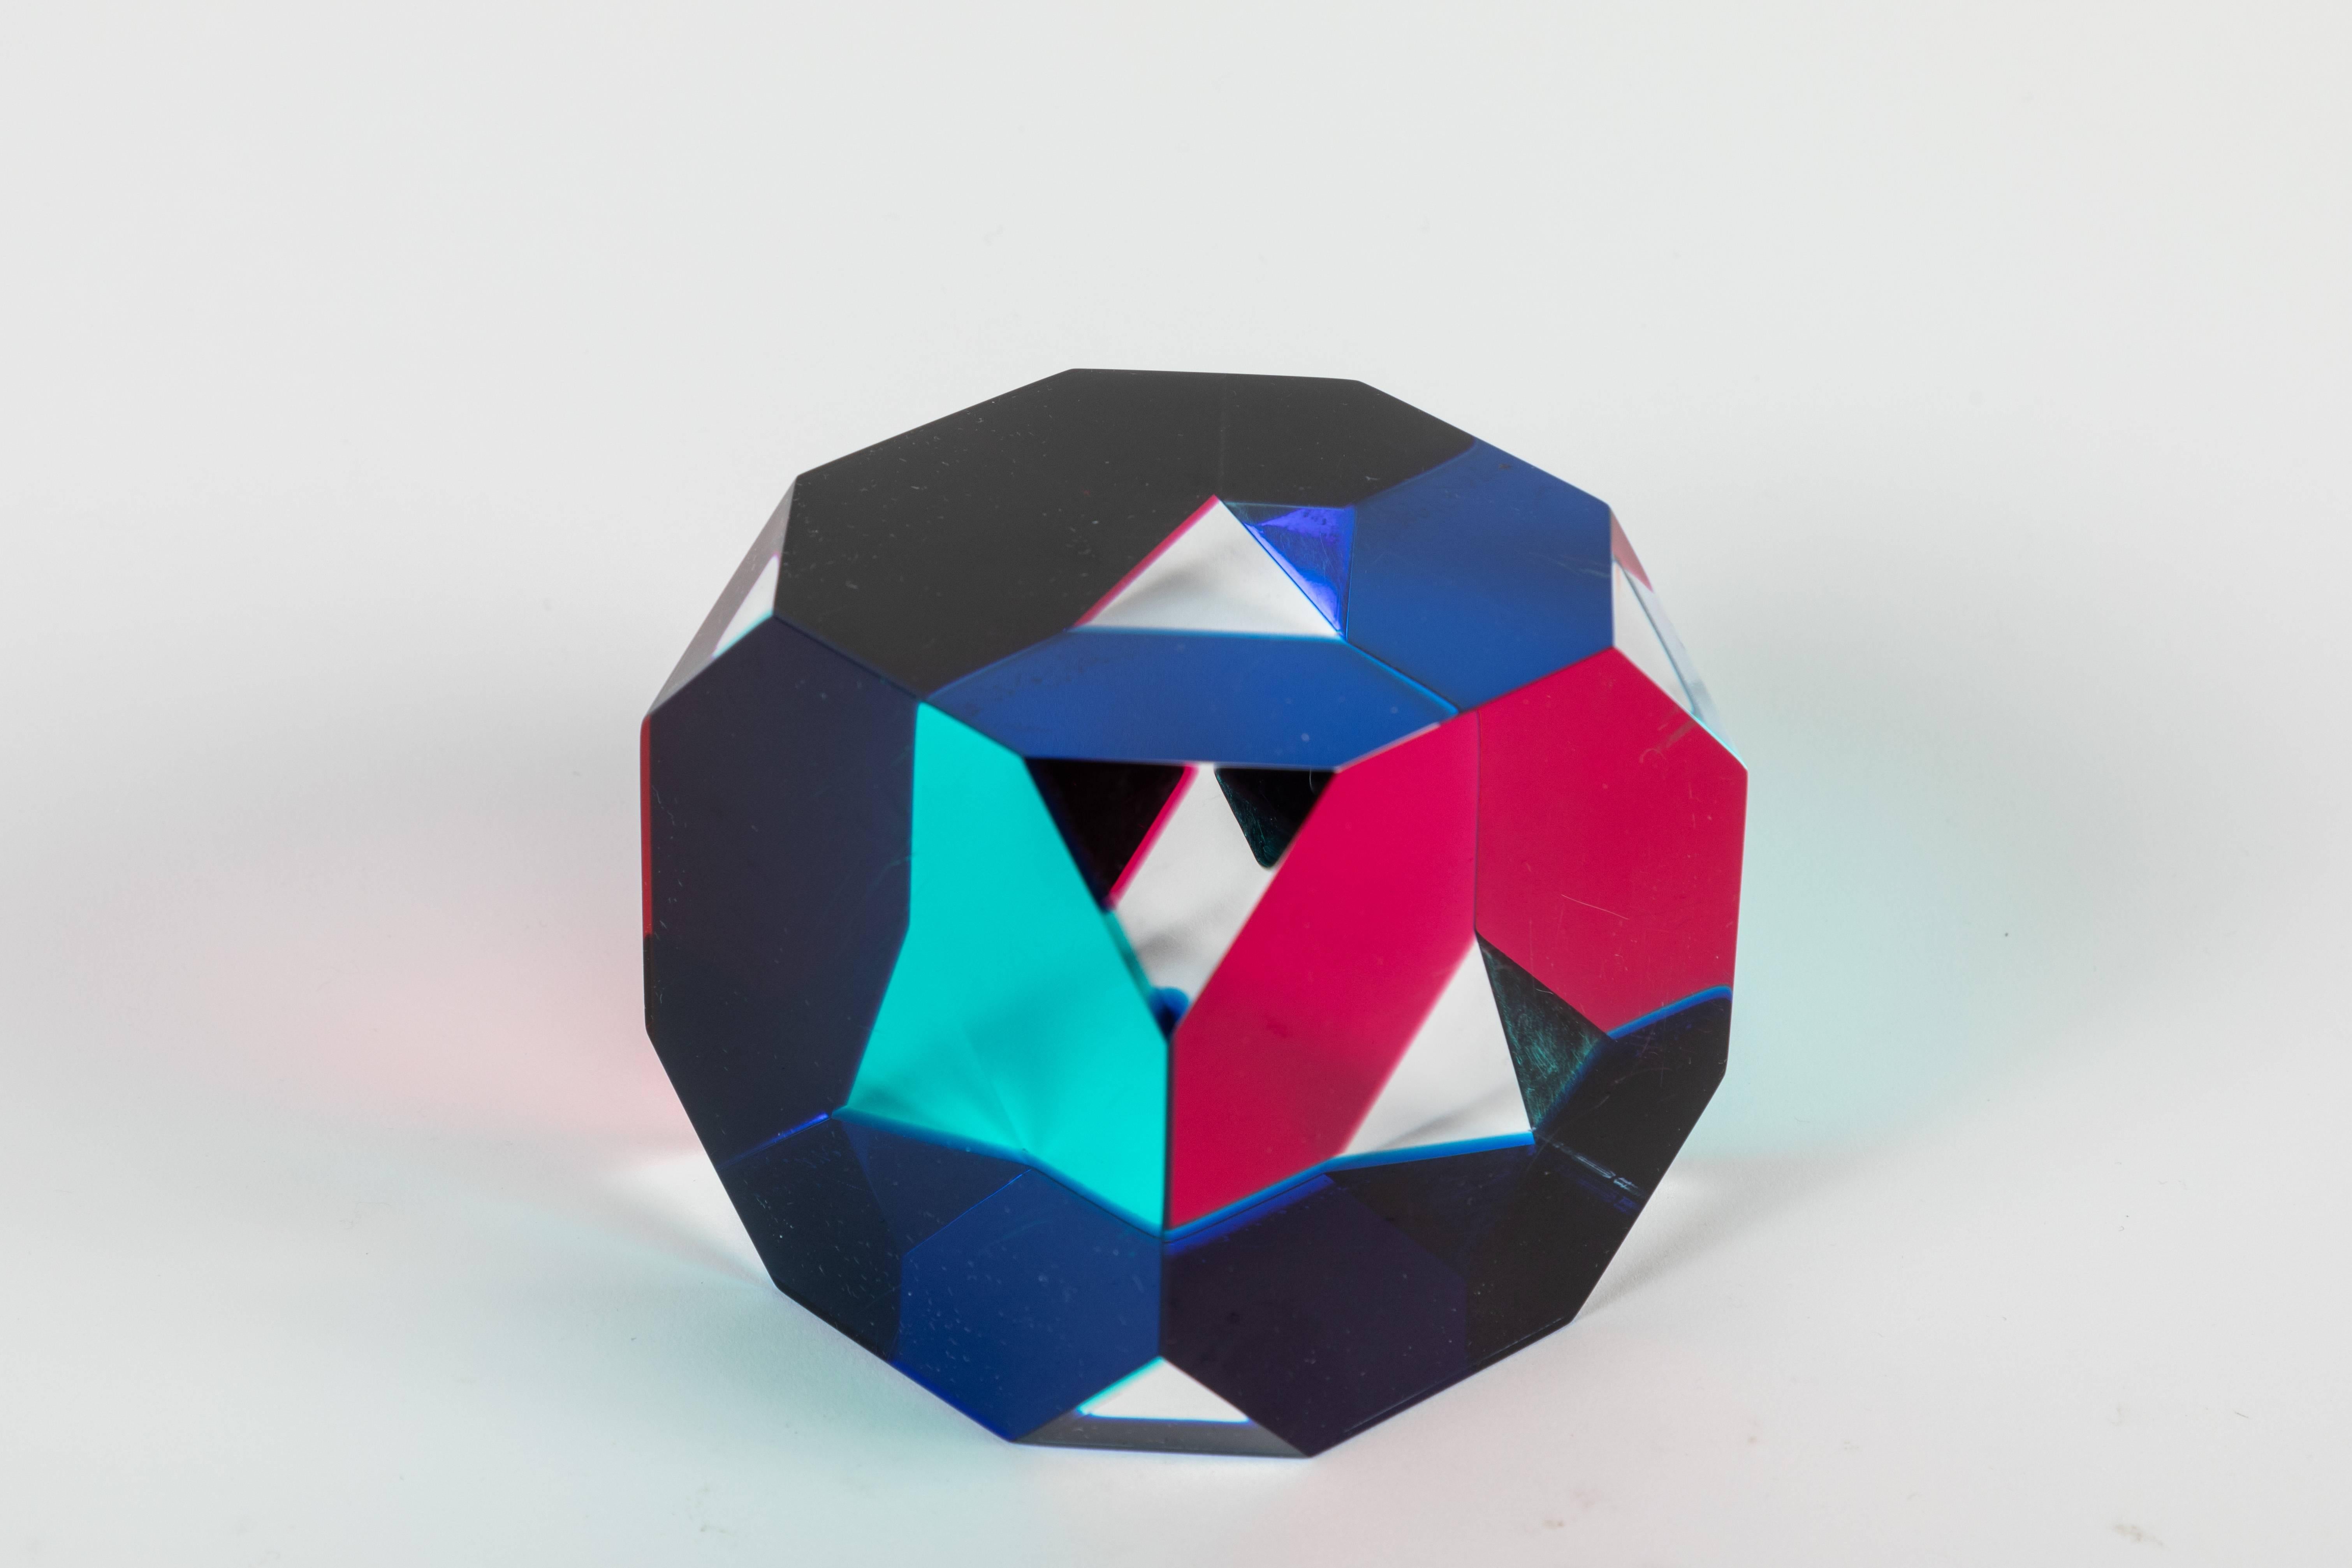 An abstract laminated cast acrylic octagonal cube sculpture by Vasa Velizar Mihich, AKA Vasa. Colors: blue, green, magenta, and clear.

Vasa is an internationally known painter and sculptor. His studio is located in Los Angeles,